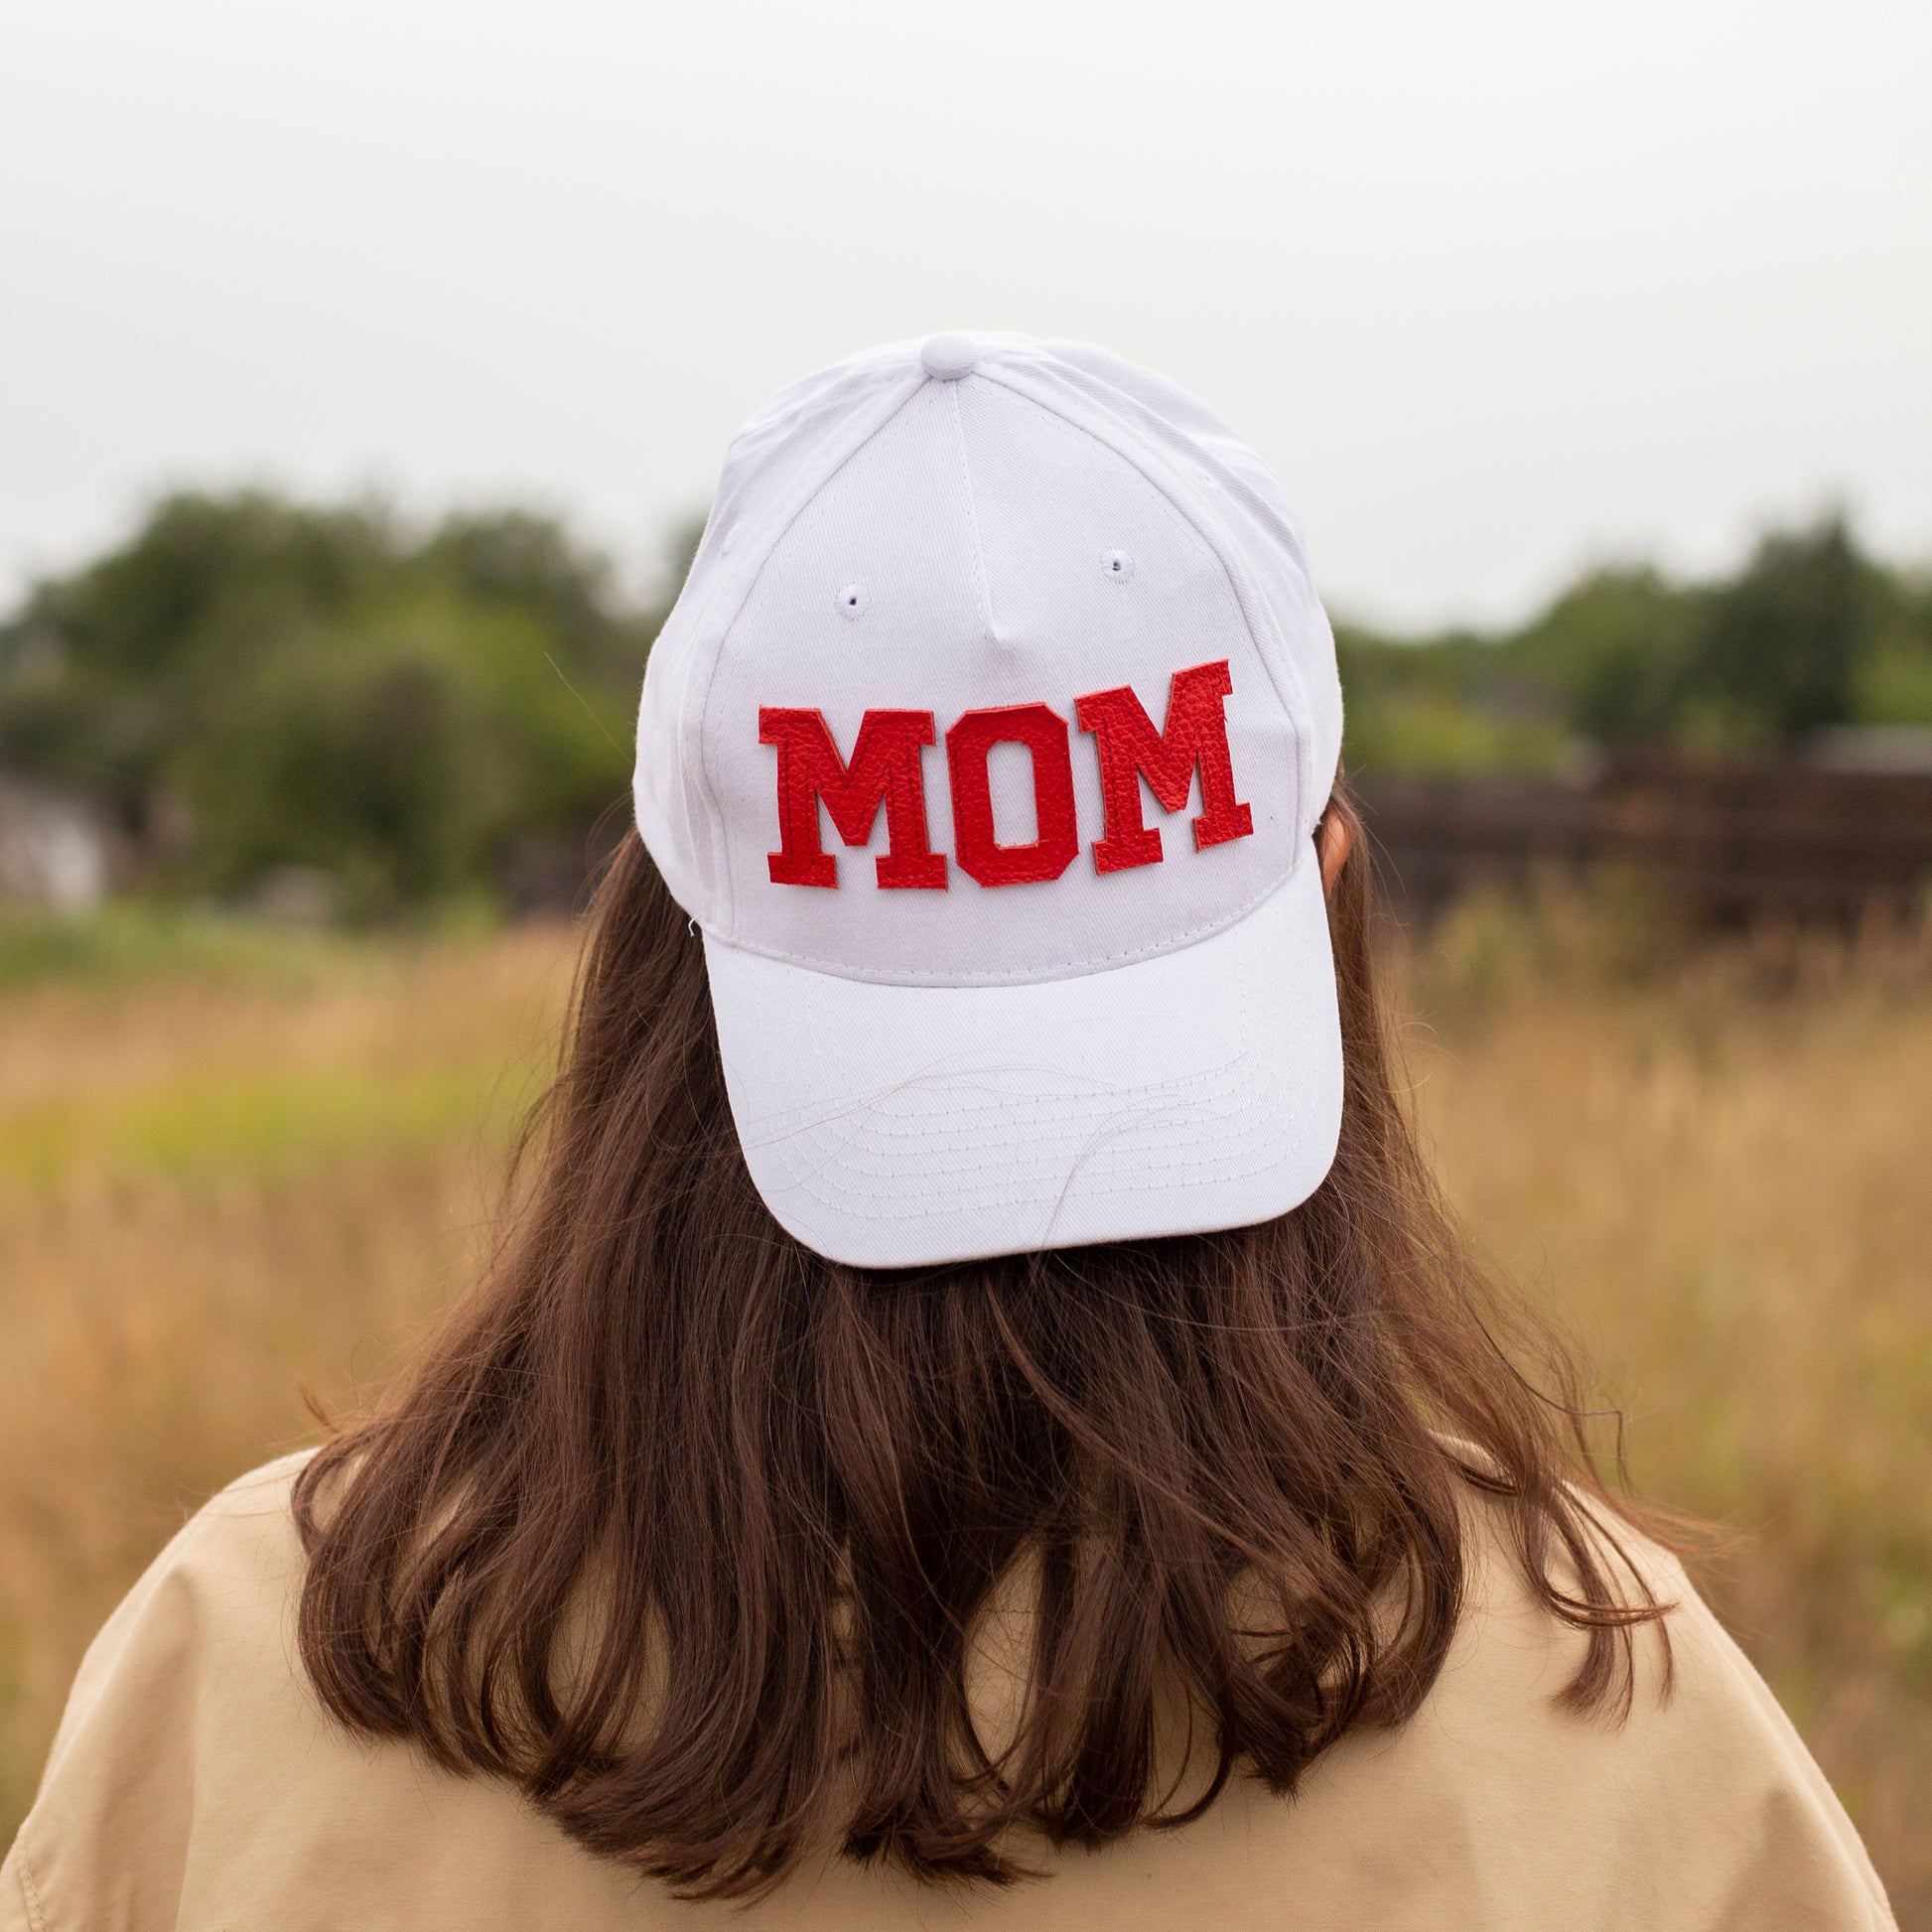 Mom and Dad Printed Hats